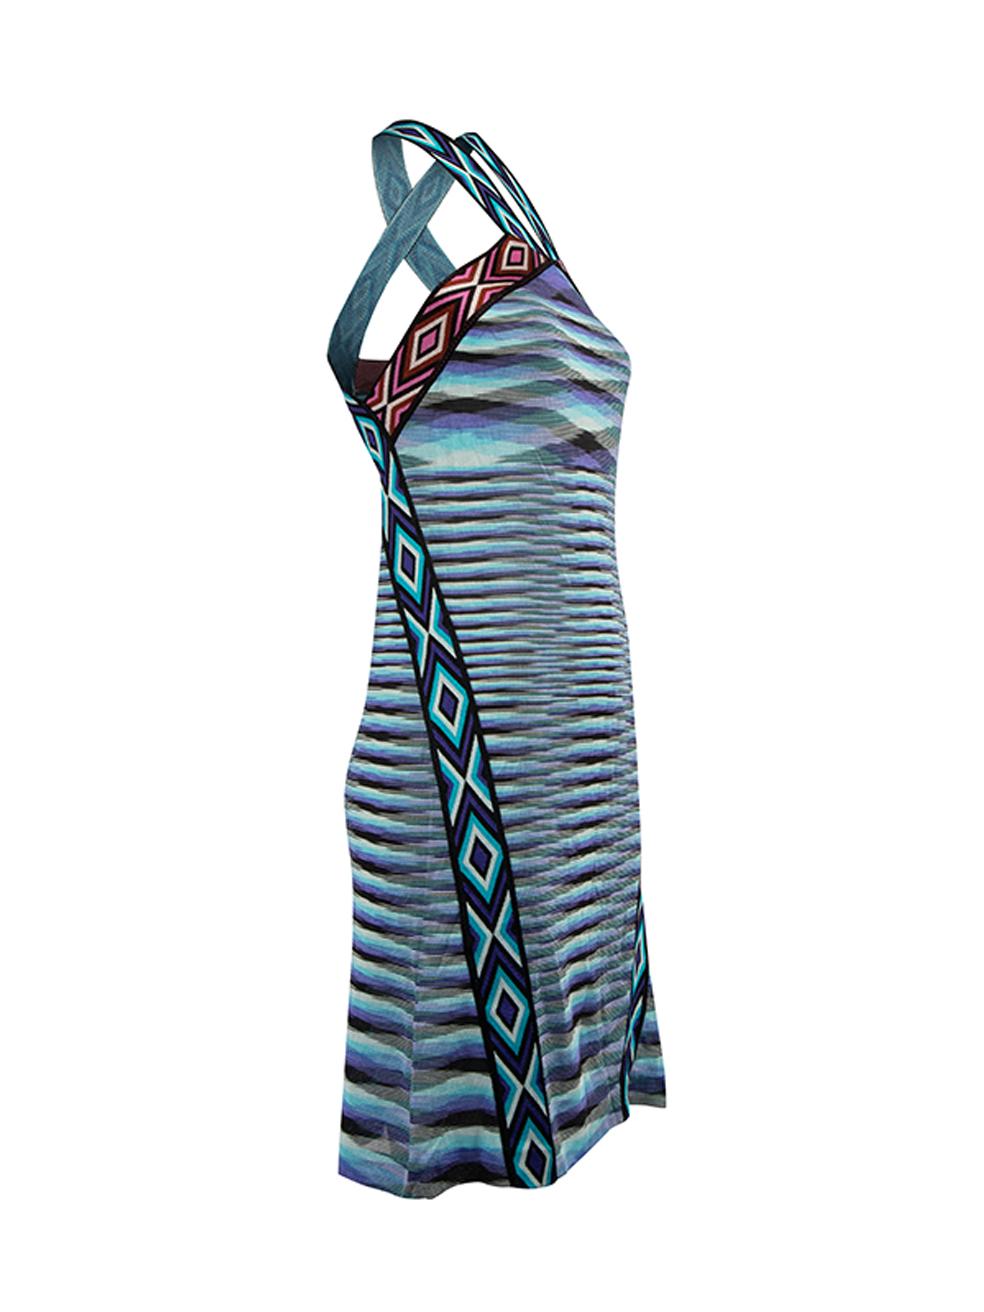 CONDITION is Very good. Hardly any visible wear to top is evident on this used Missoni designer resale item. Details Blue Viscose Mini dress Abstract patterned Cross strap halter neck Sleeveless Made in Italy Composition 100% Viscose Care